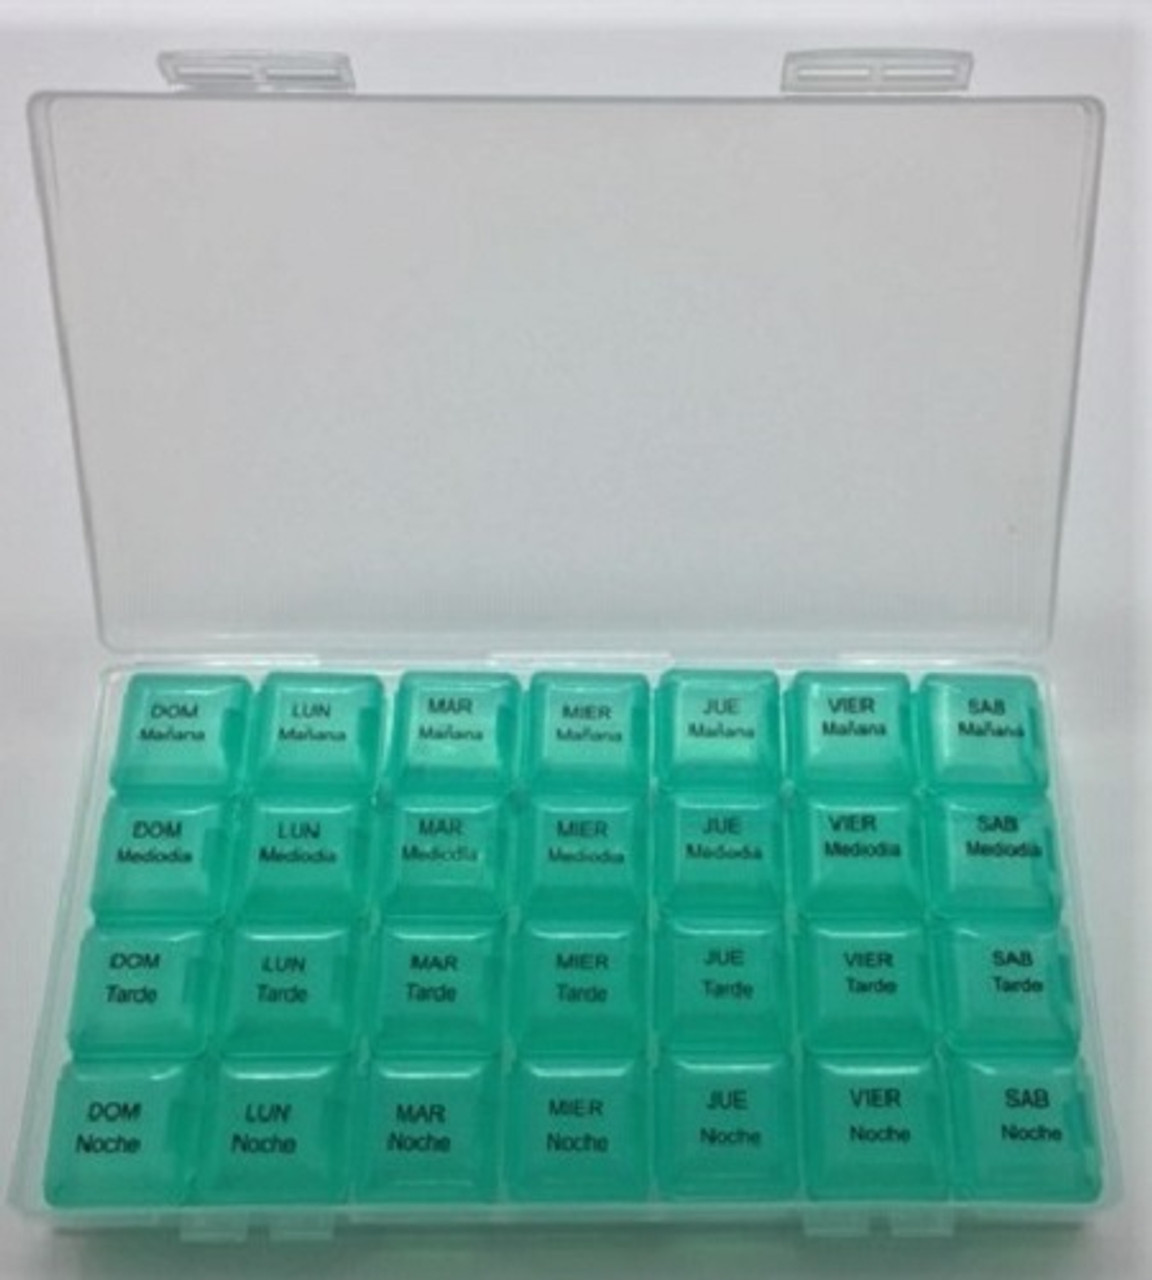 7 Day Weekly Four Times per Day Large Spanish Pill Box Organizer